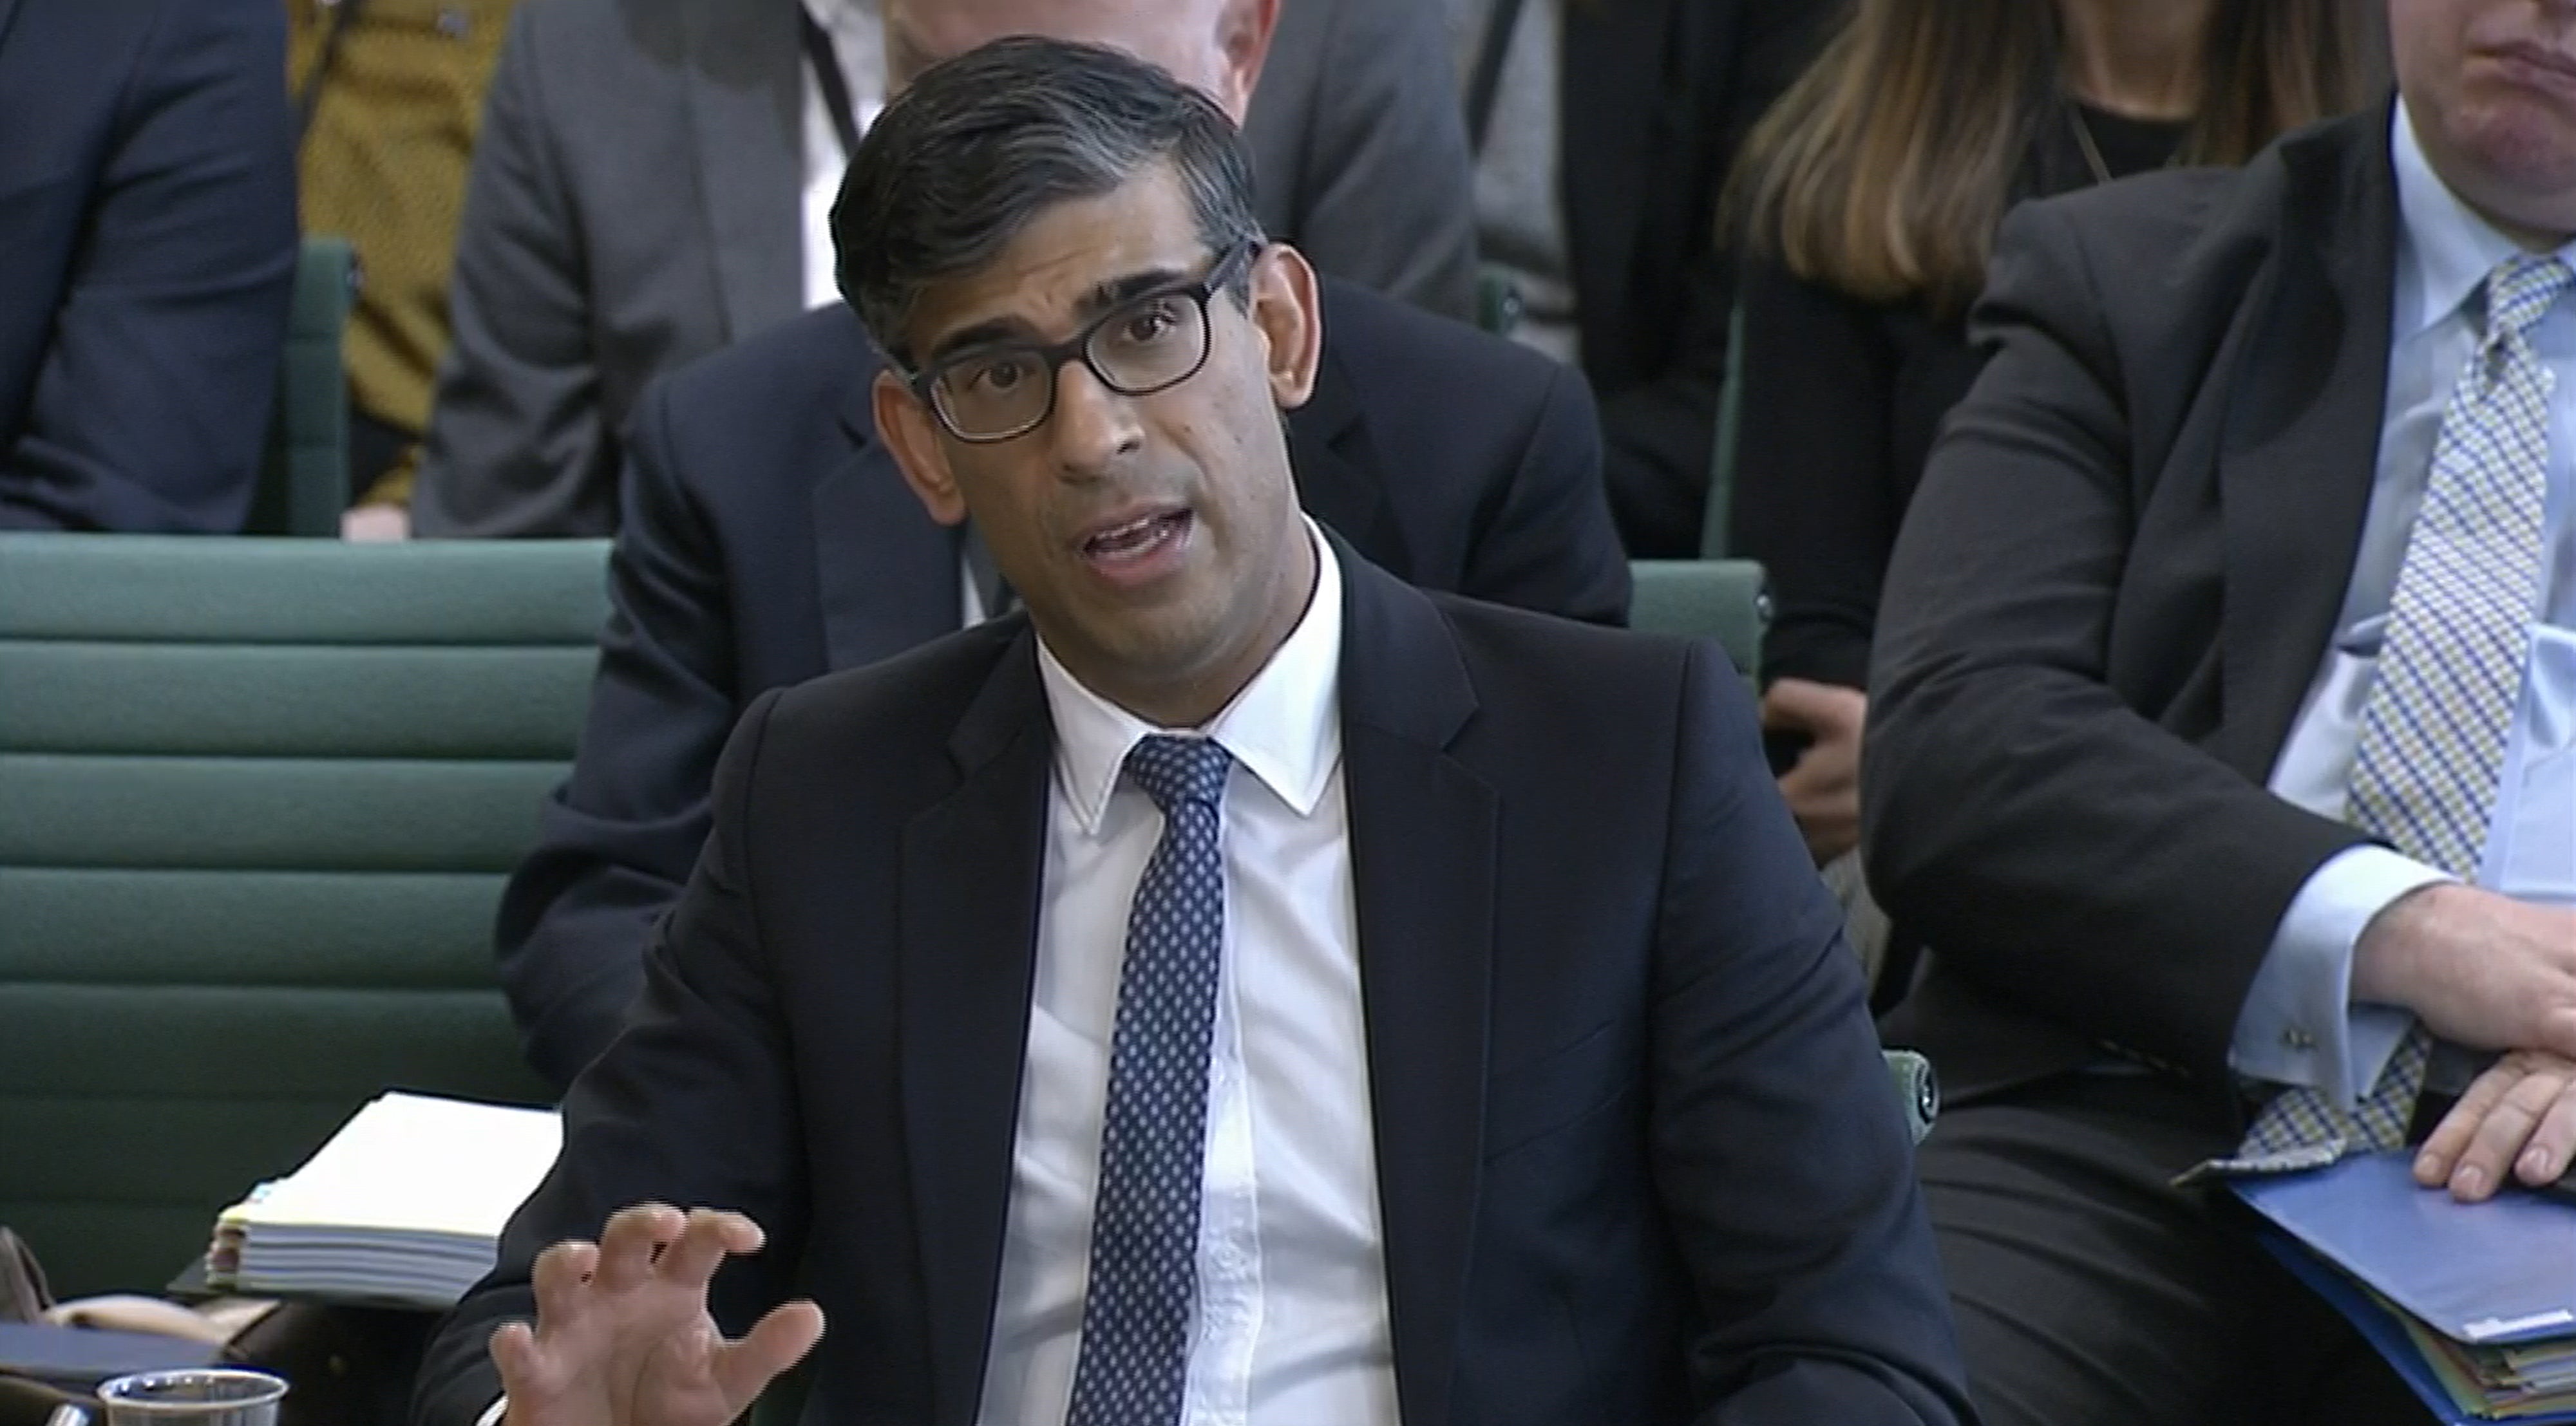 Rishi Sunak appearing before the Commons Liaison Committee at the House of Commons